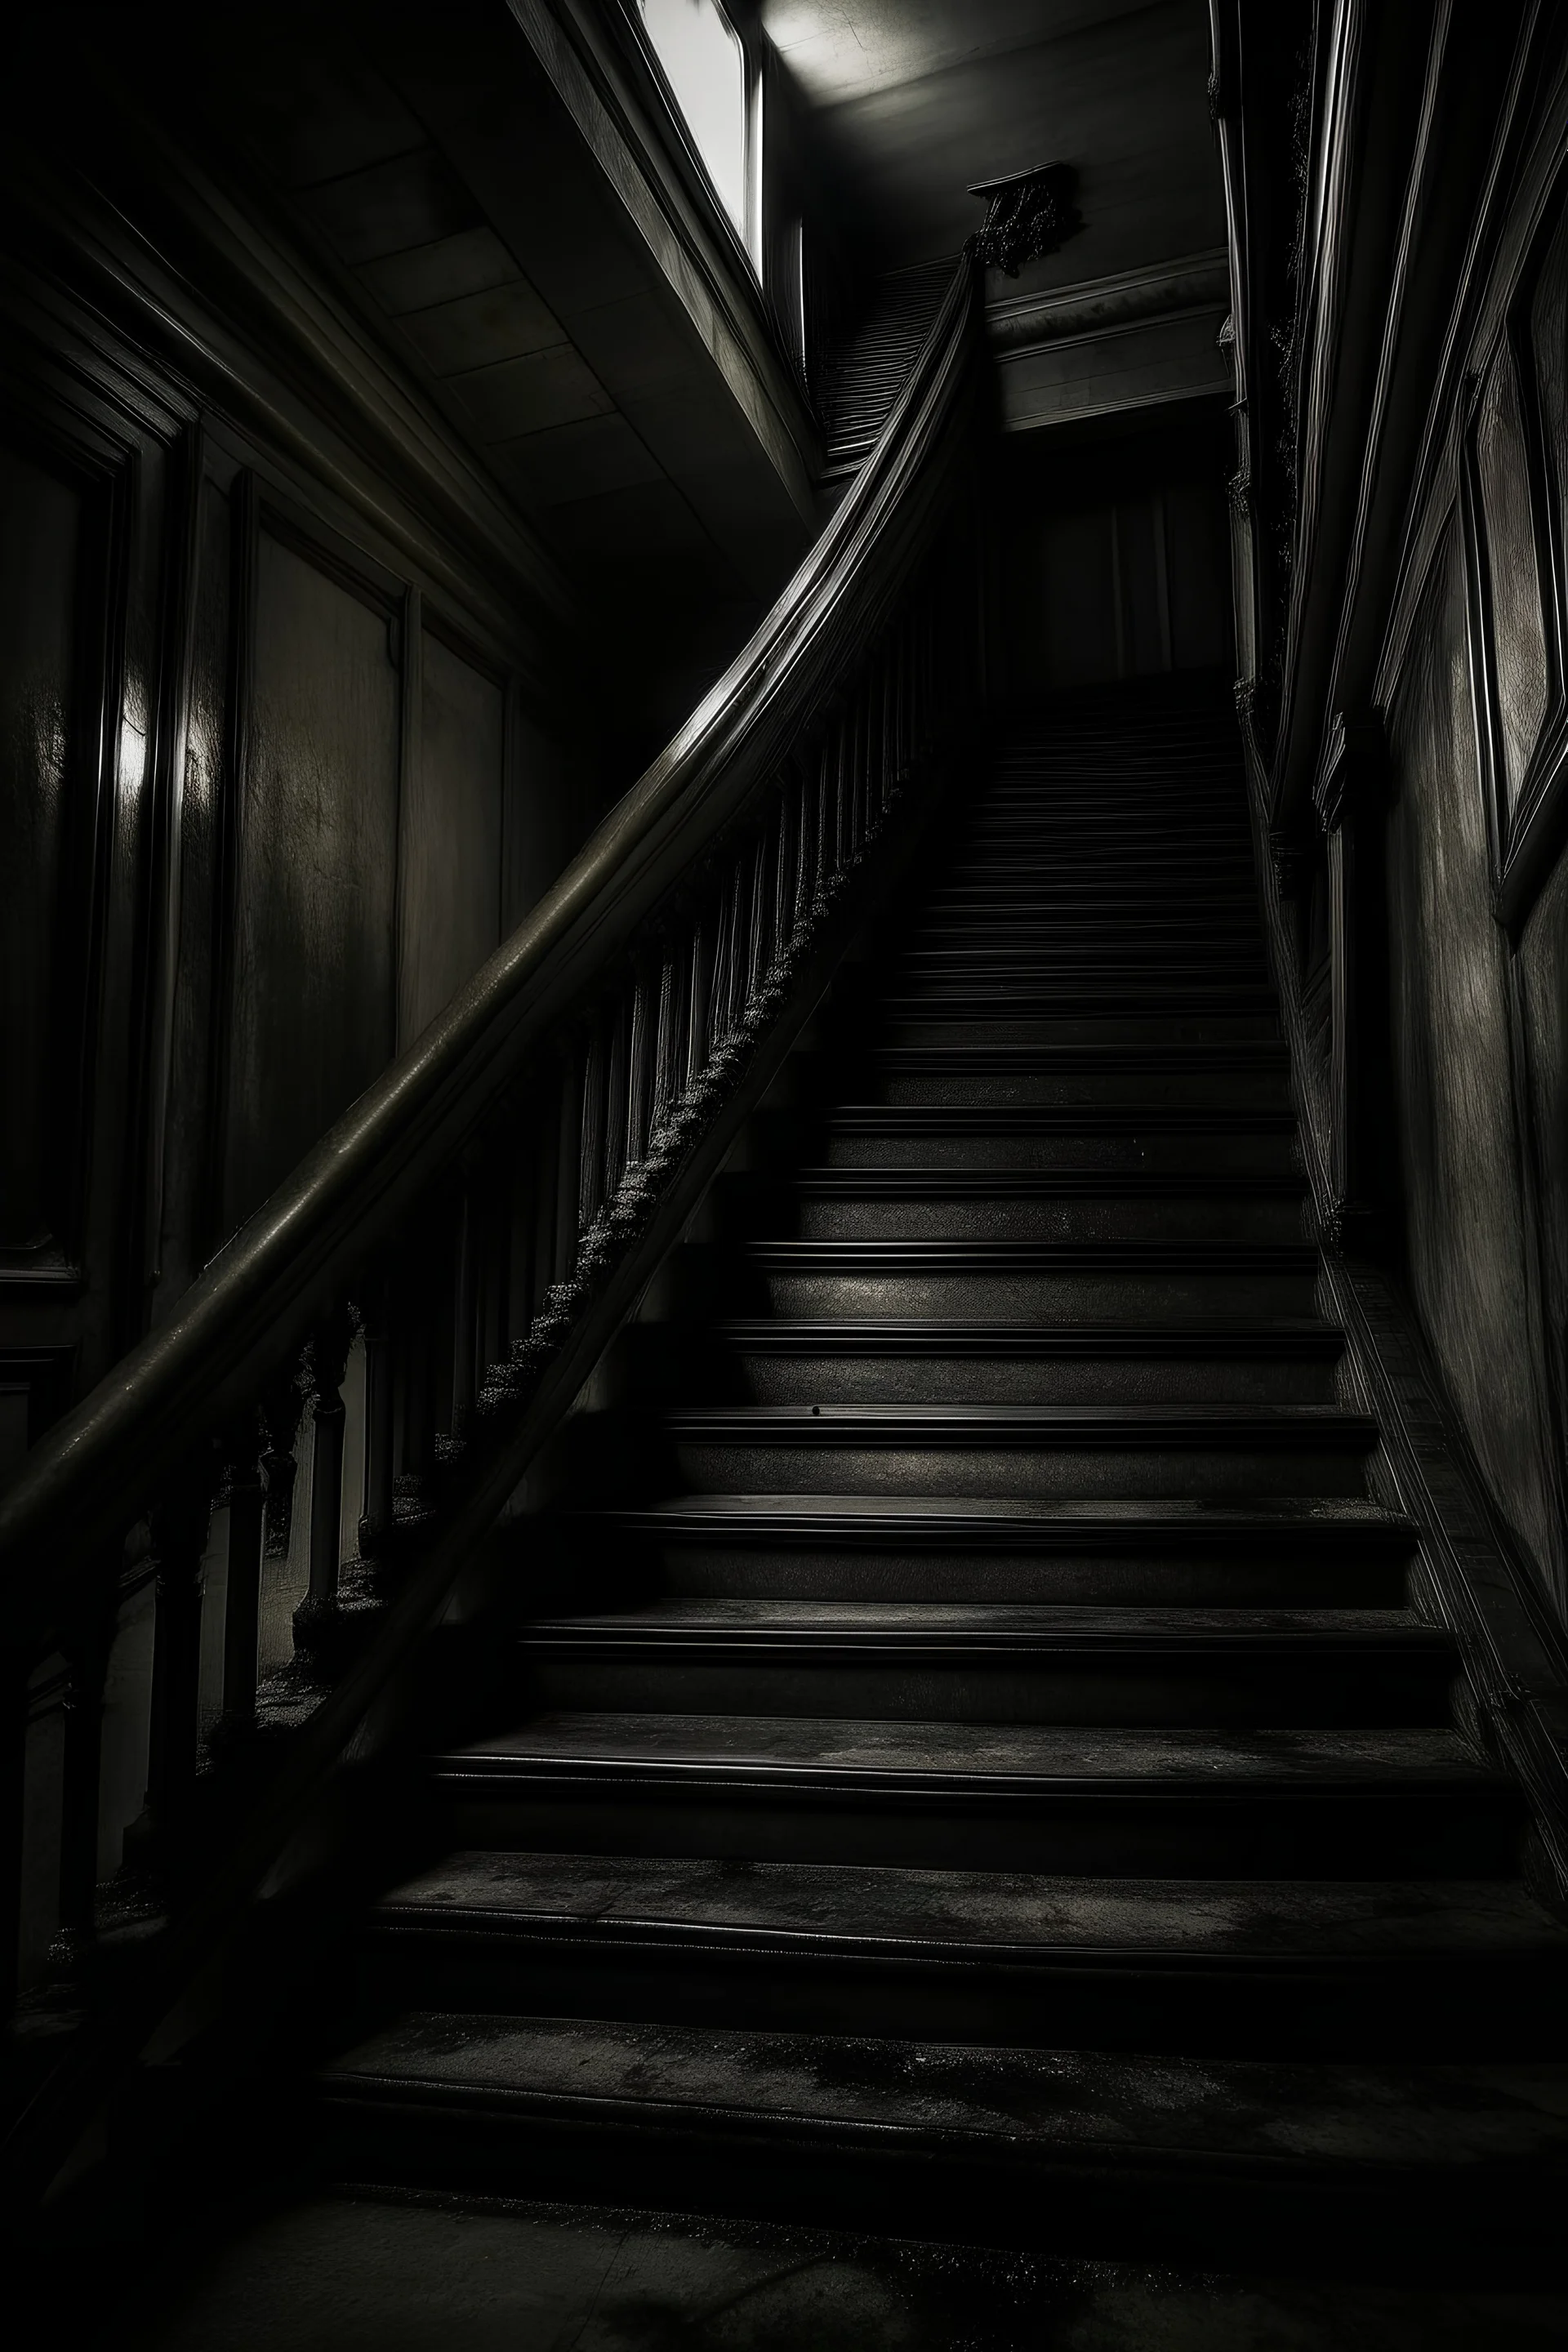 The odyssey, dark passage, cold, dark, depressing, with the stairs descend